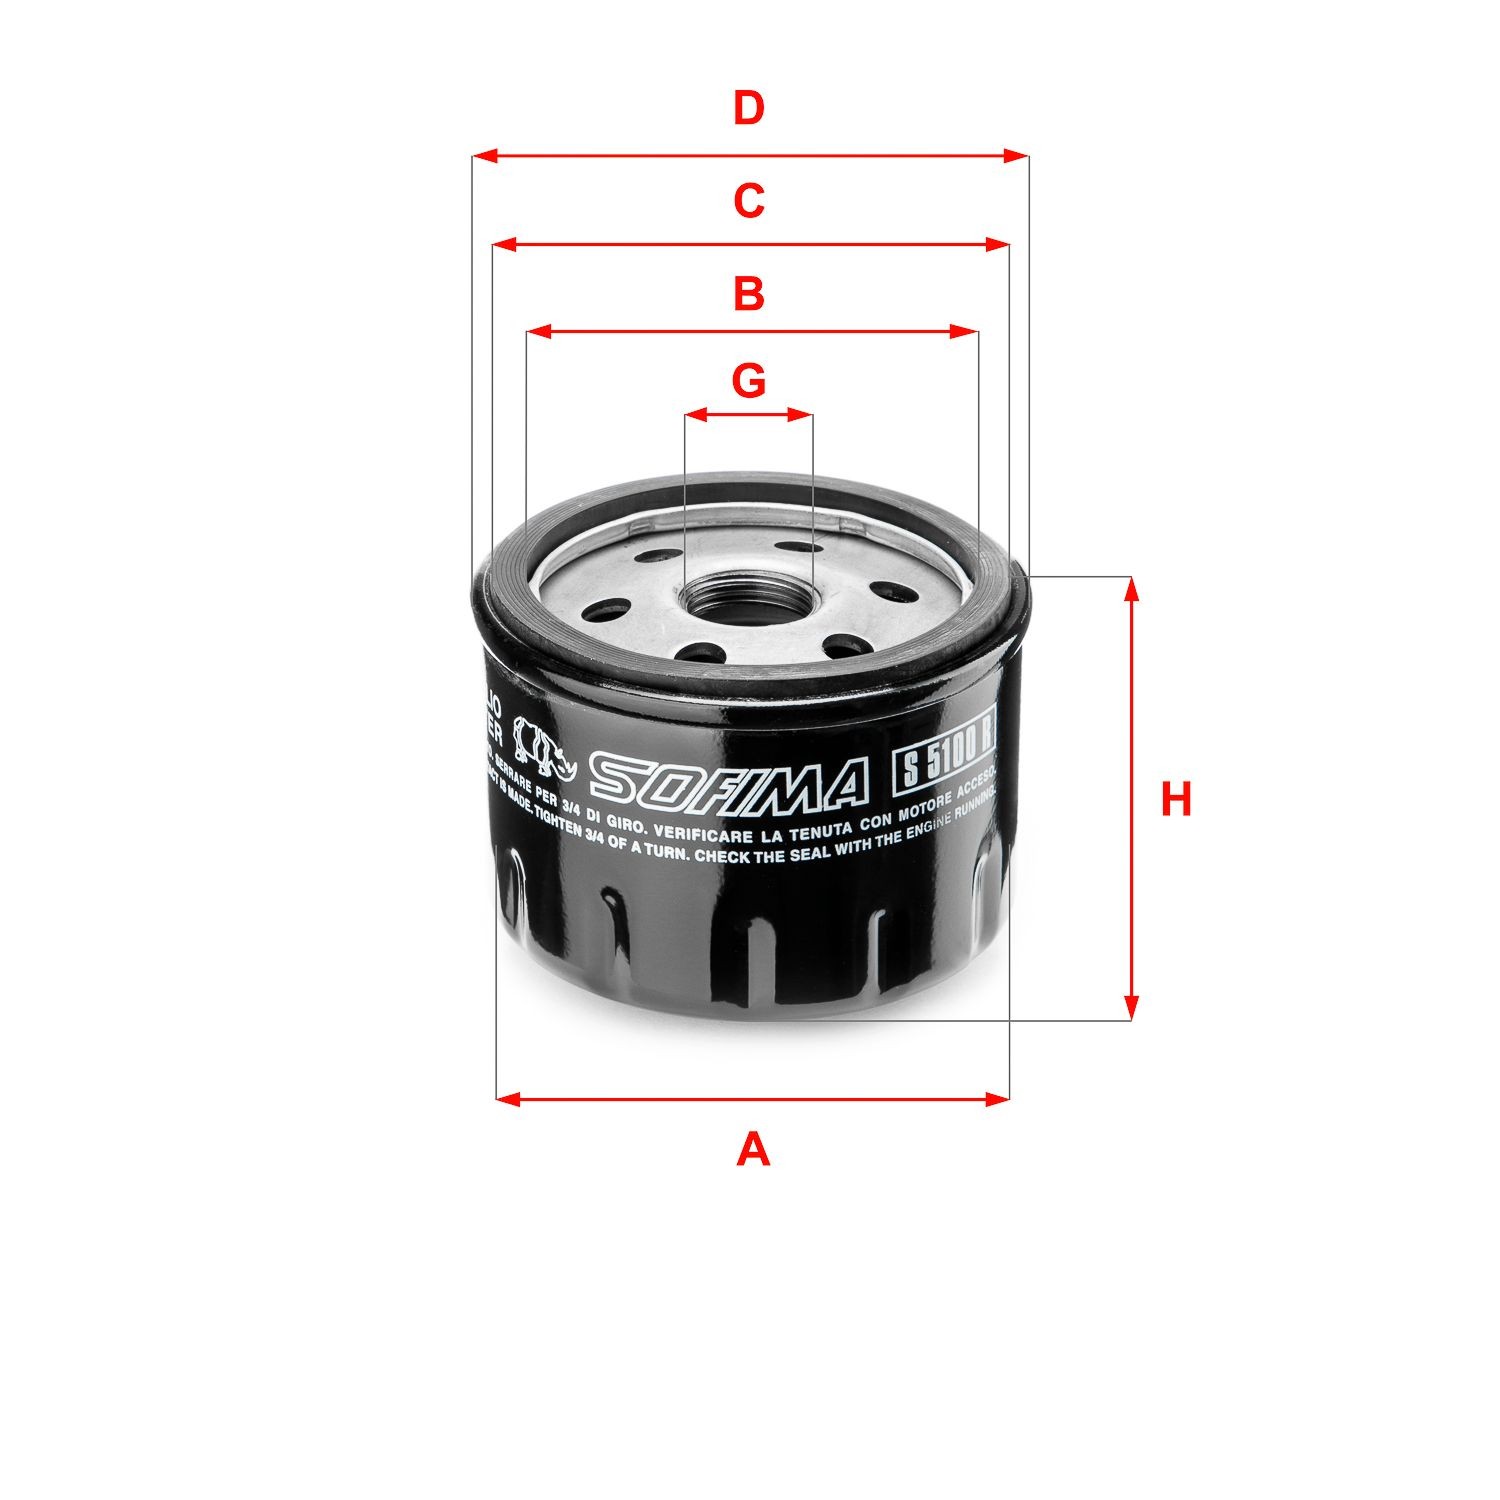 SOFIMA S 5100 R Oil filter 3/4-16 UNF, with one anti-return valve, Spin-on Filter